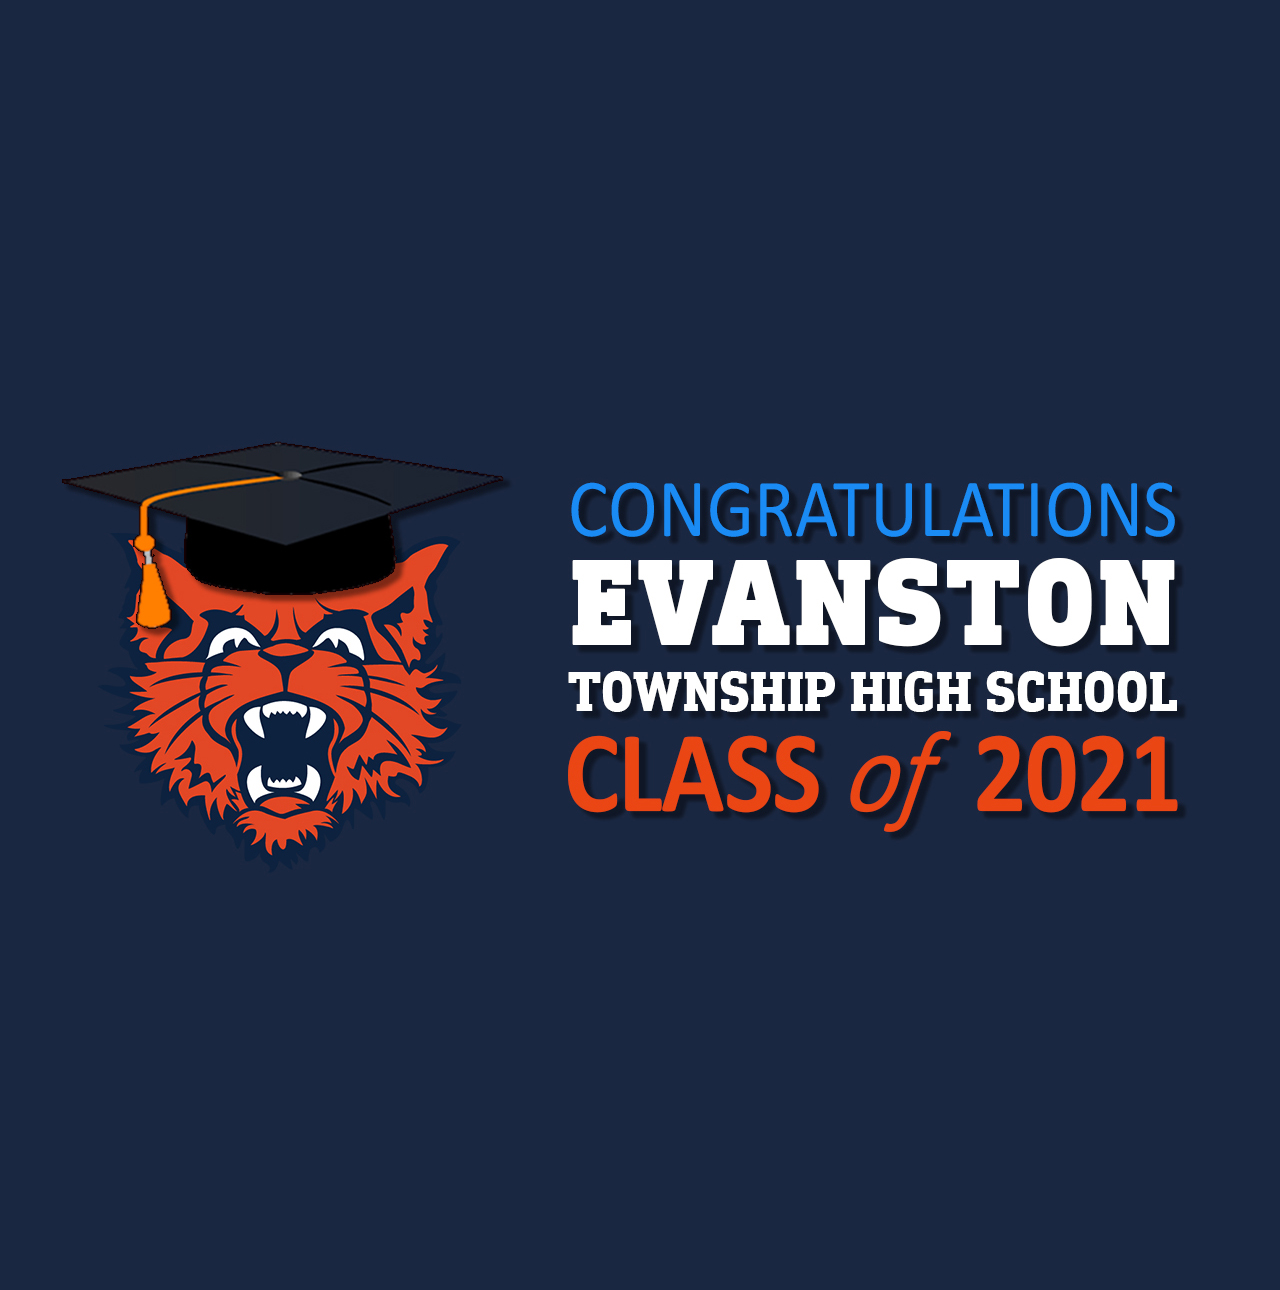 Evanston Township HS on Twitter "Congratulations to the ETHS Class of